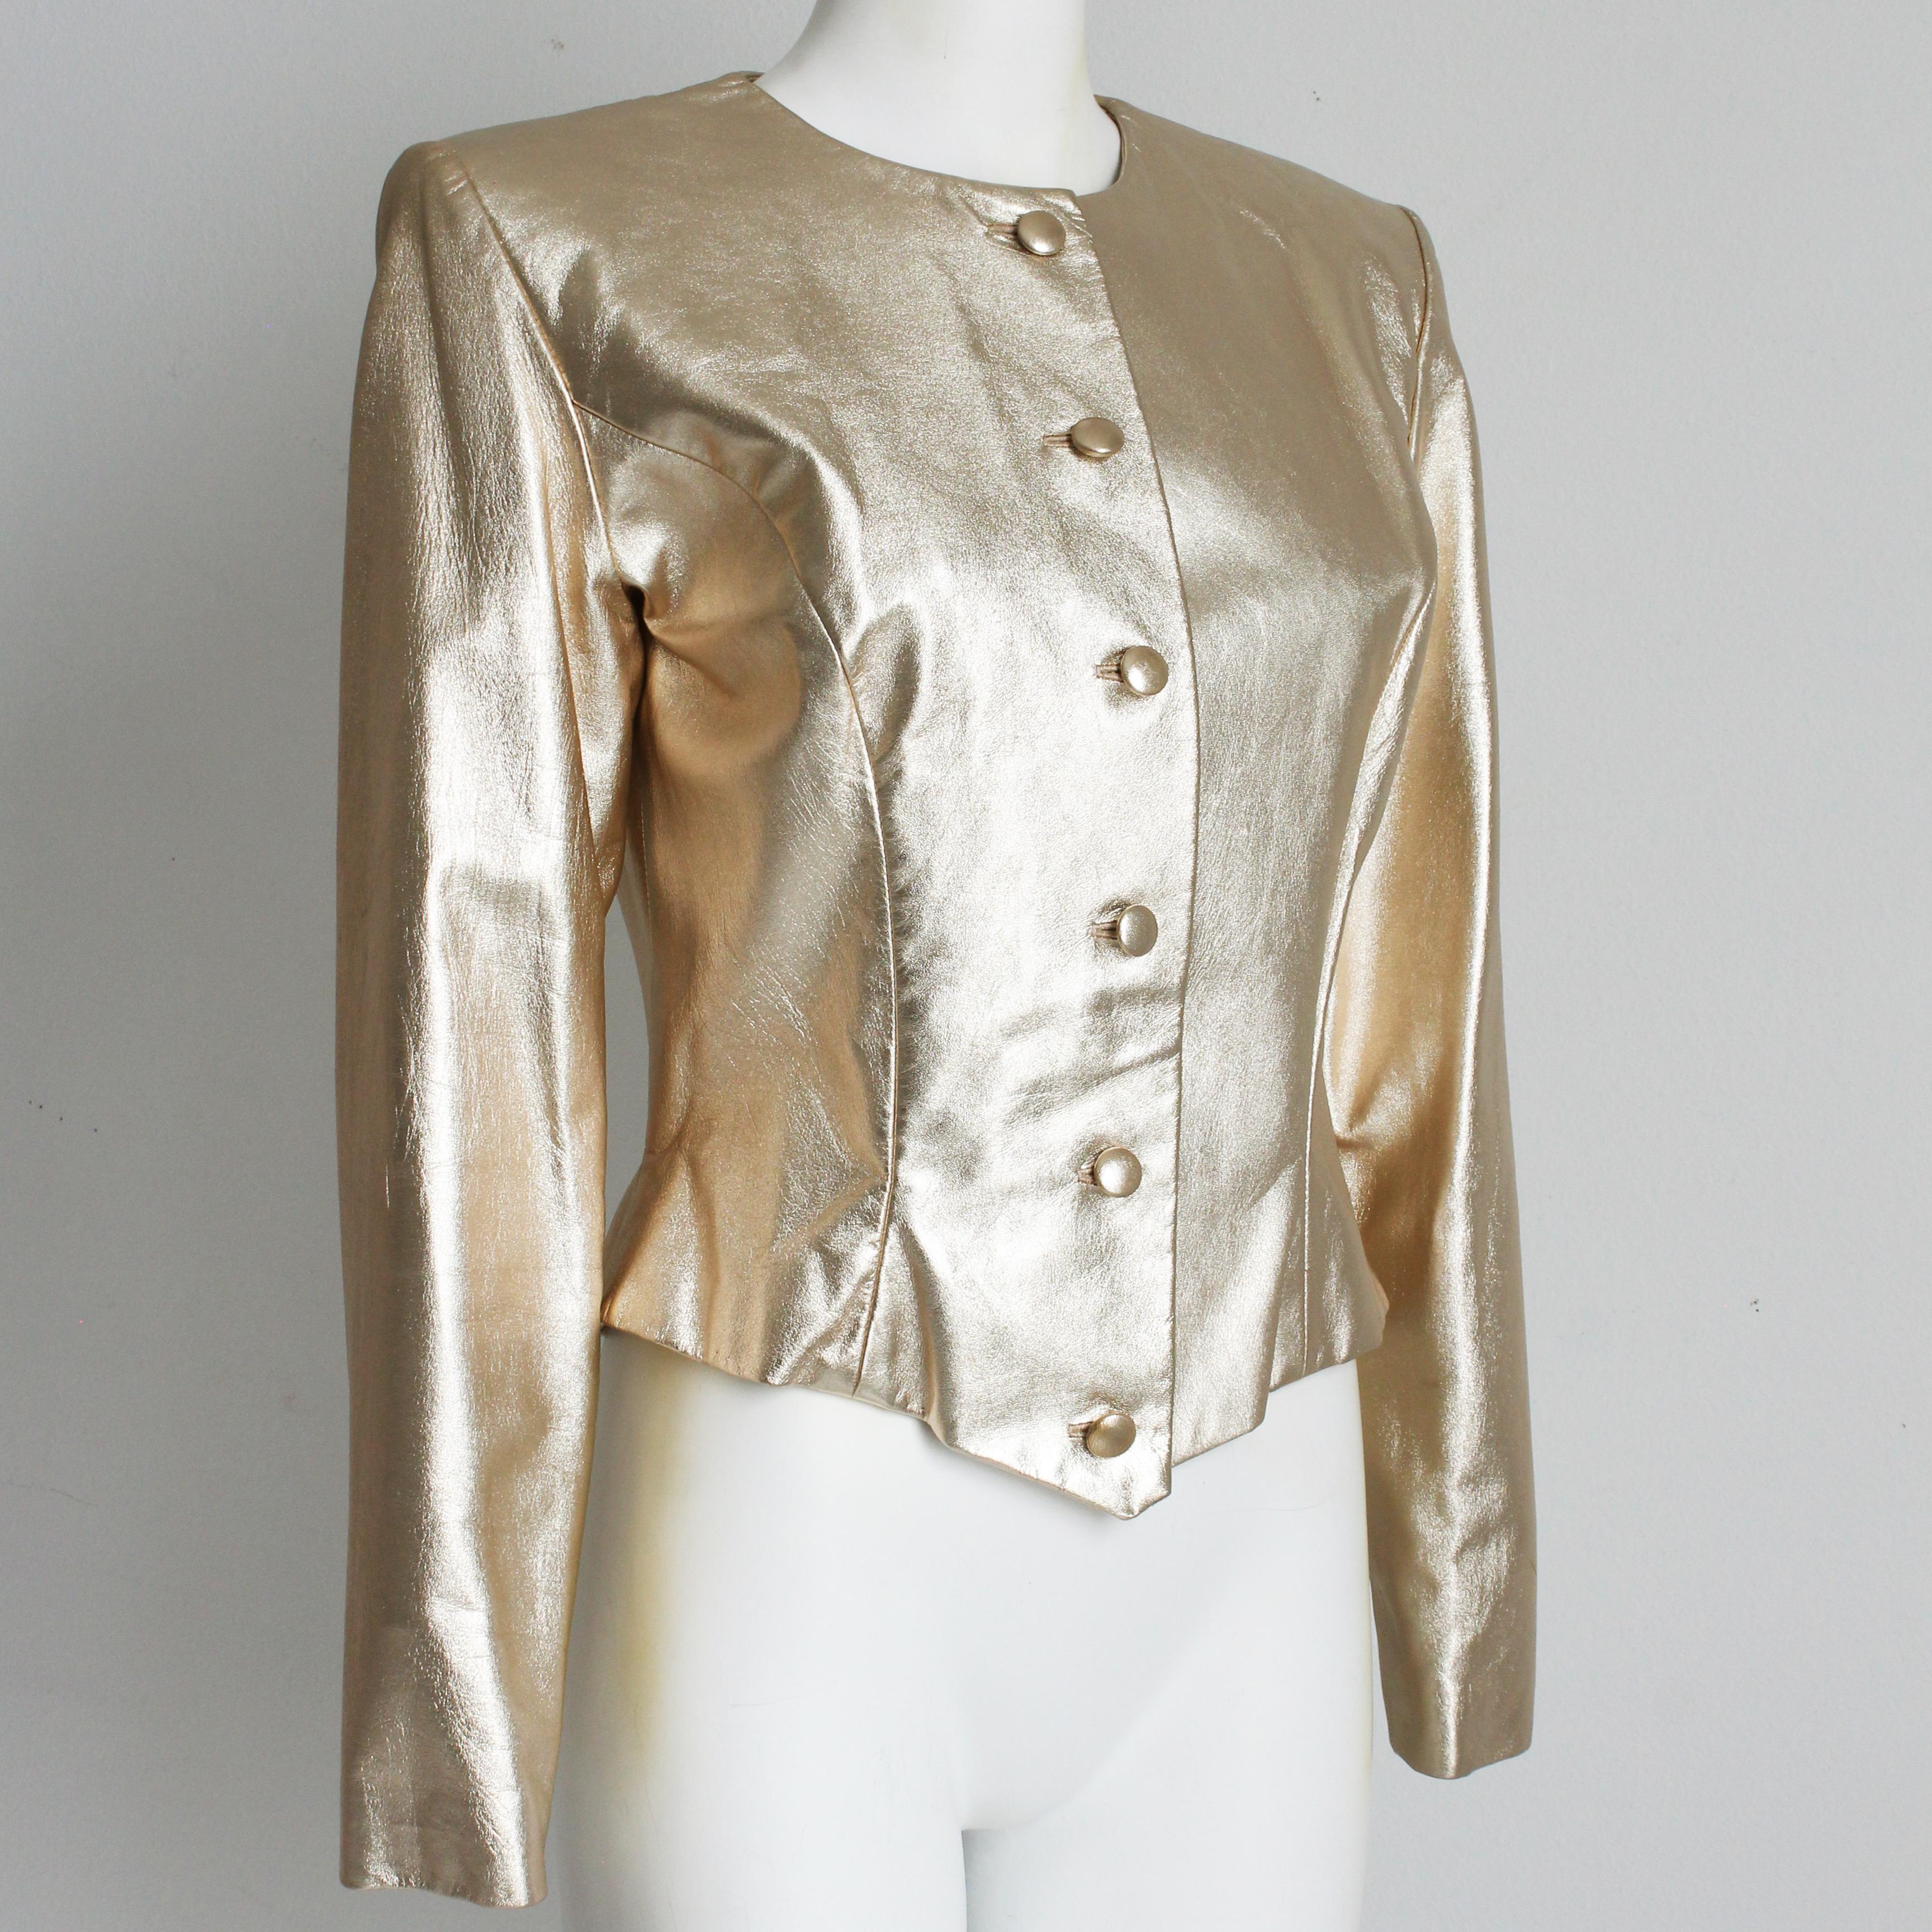 Vicky Tiel Couture Jacket Metallic Gold Leather Formal Evening Vintage Size 42 In Good Condition For Sale In Port Saint Lucie, FL